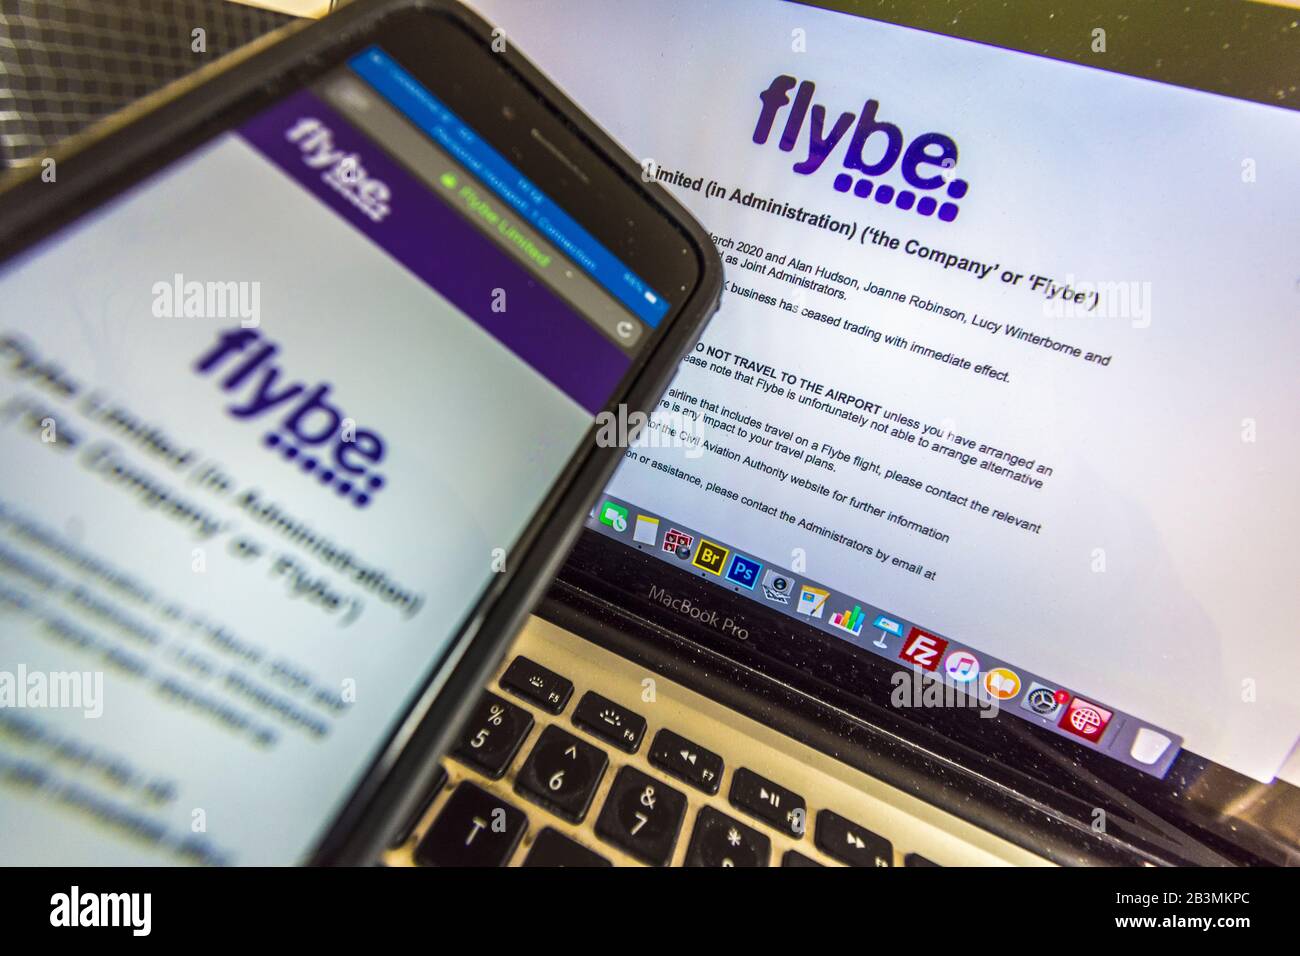 Ireland. 5th March 2020. Flybe entered Administration on 5 March 2020 and Alan Hudson, Joanne Robinson, Lucy Winterborne and Simon Edel of EY have been appointed as Joint Administrators. All flights have been grounded and the UK business has ceased trading with immediate effect. Image shows notification to customers on website and App. Stock Photo